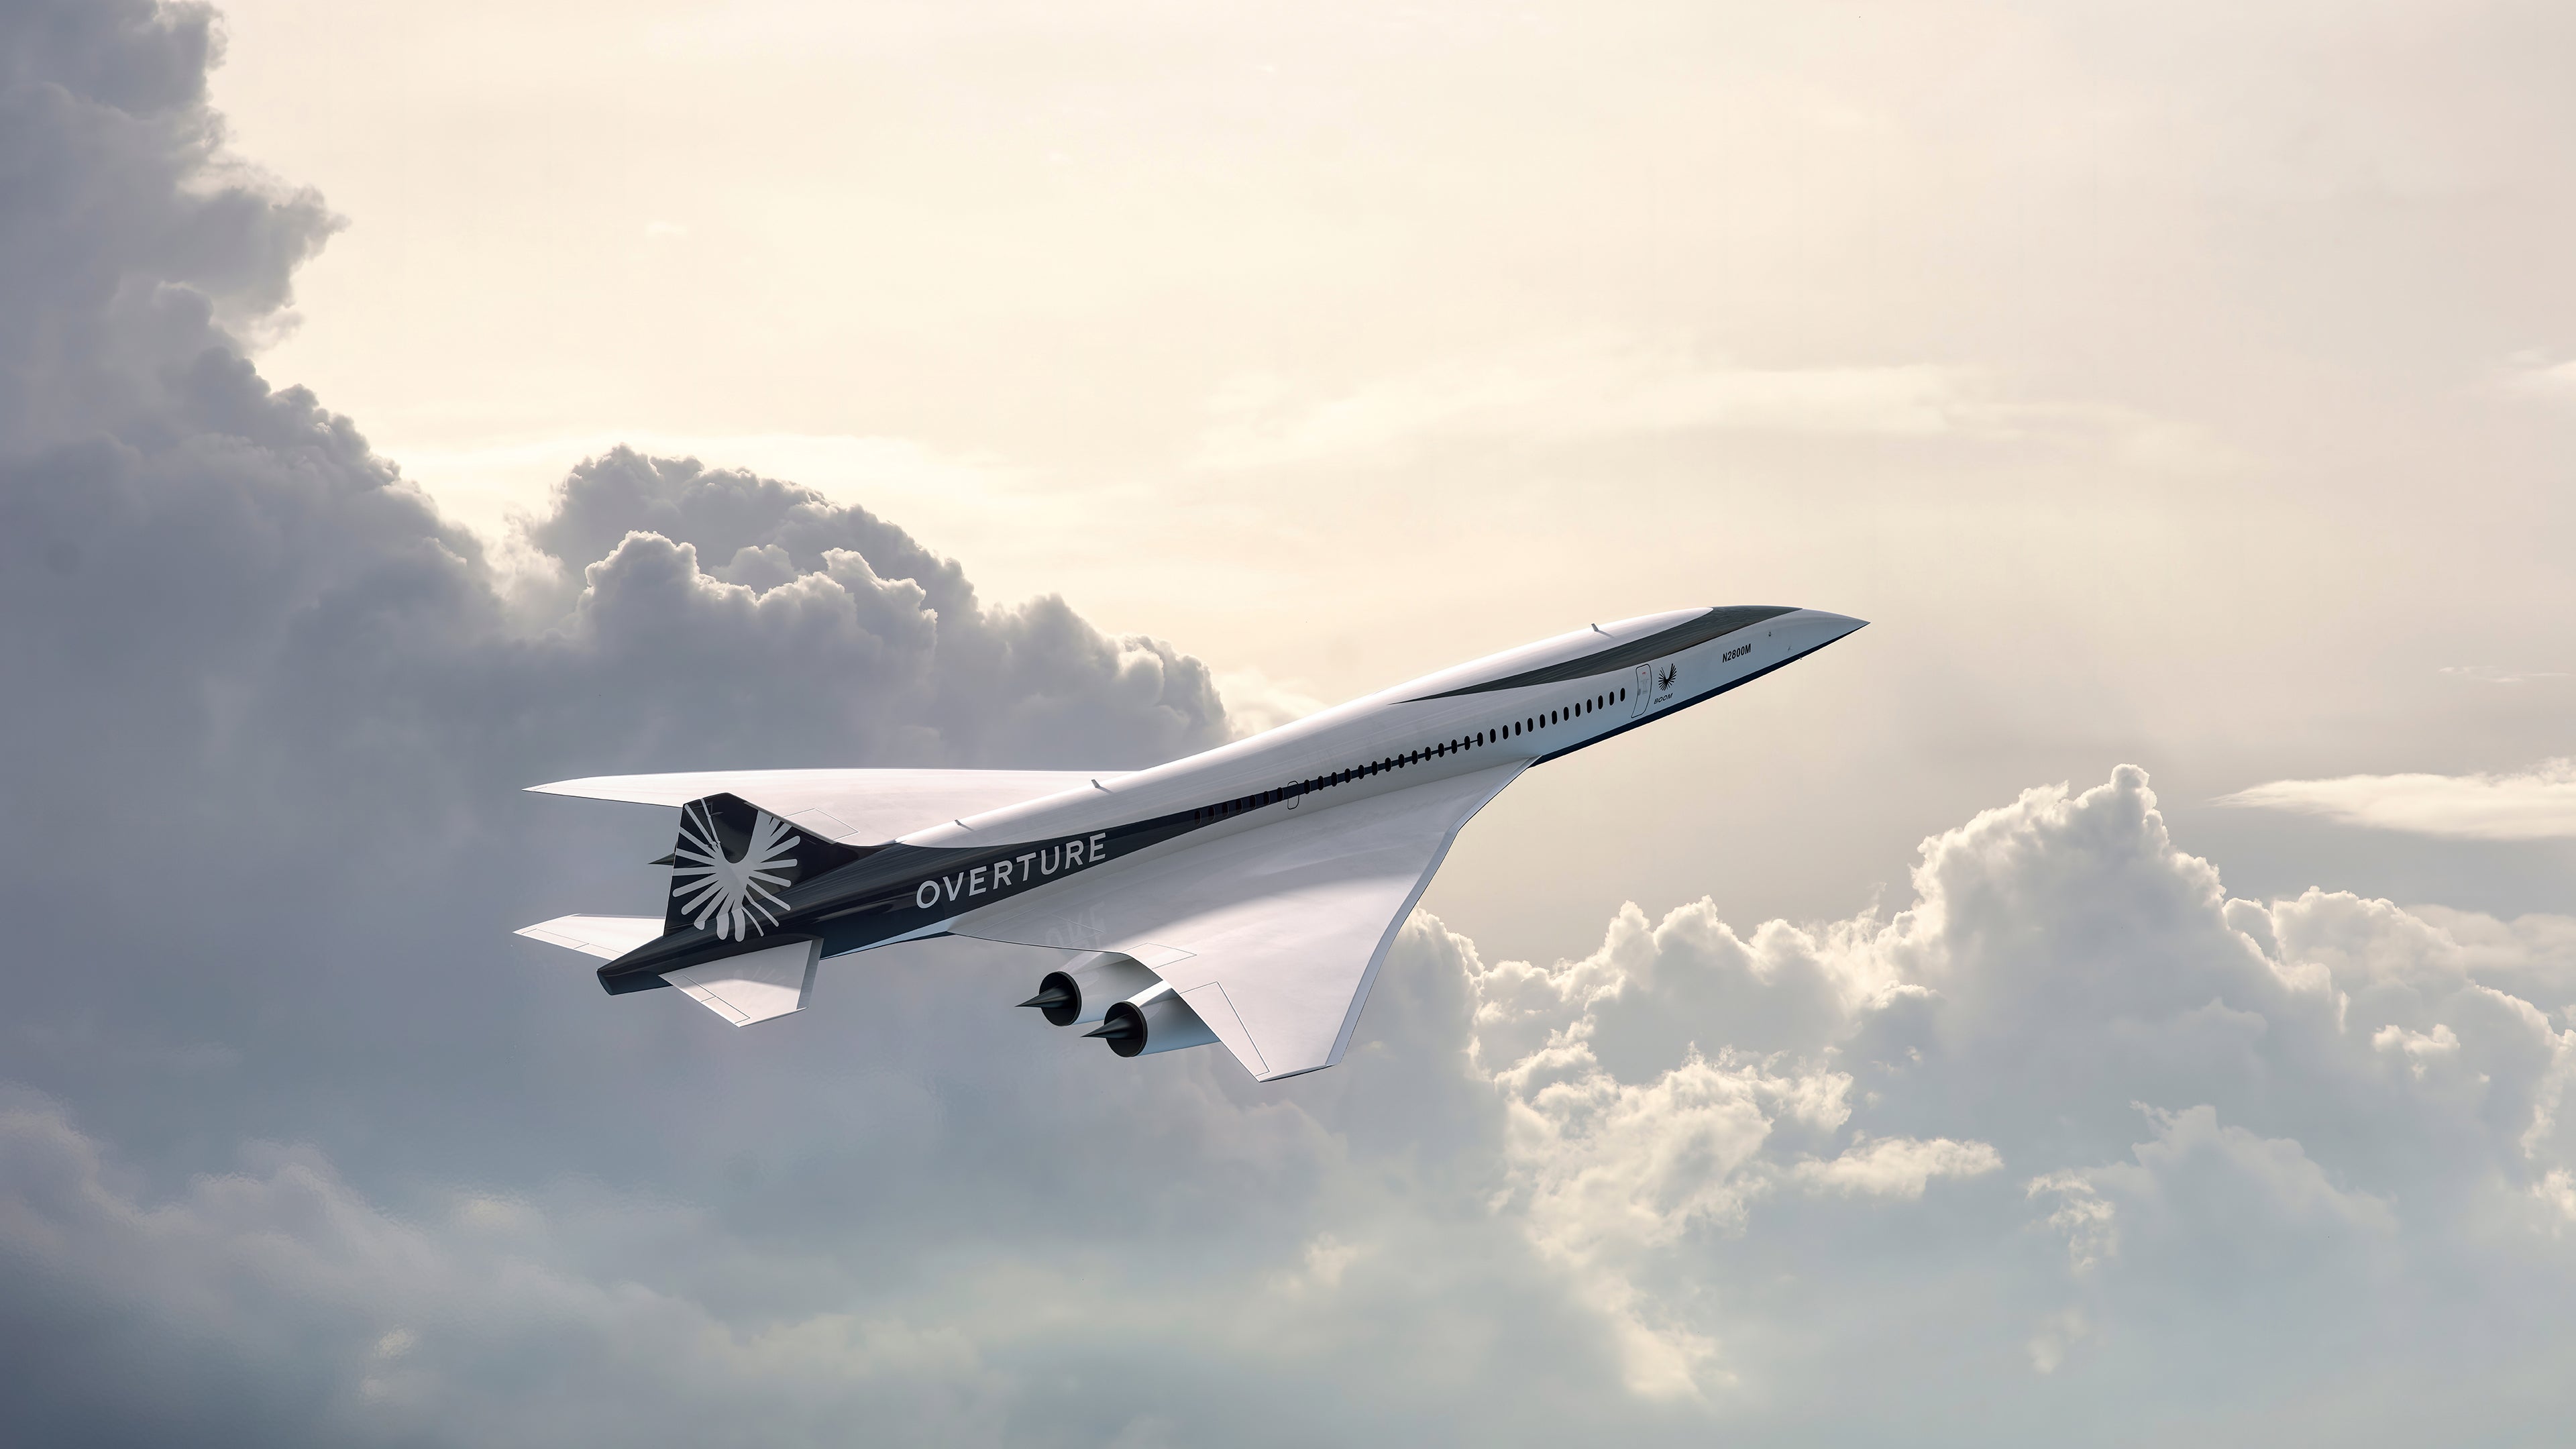 Concept art of the proposed Overture supersonic airliner under development by Boom Supersonic